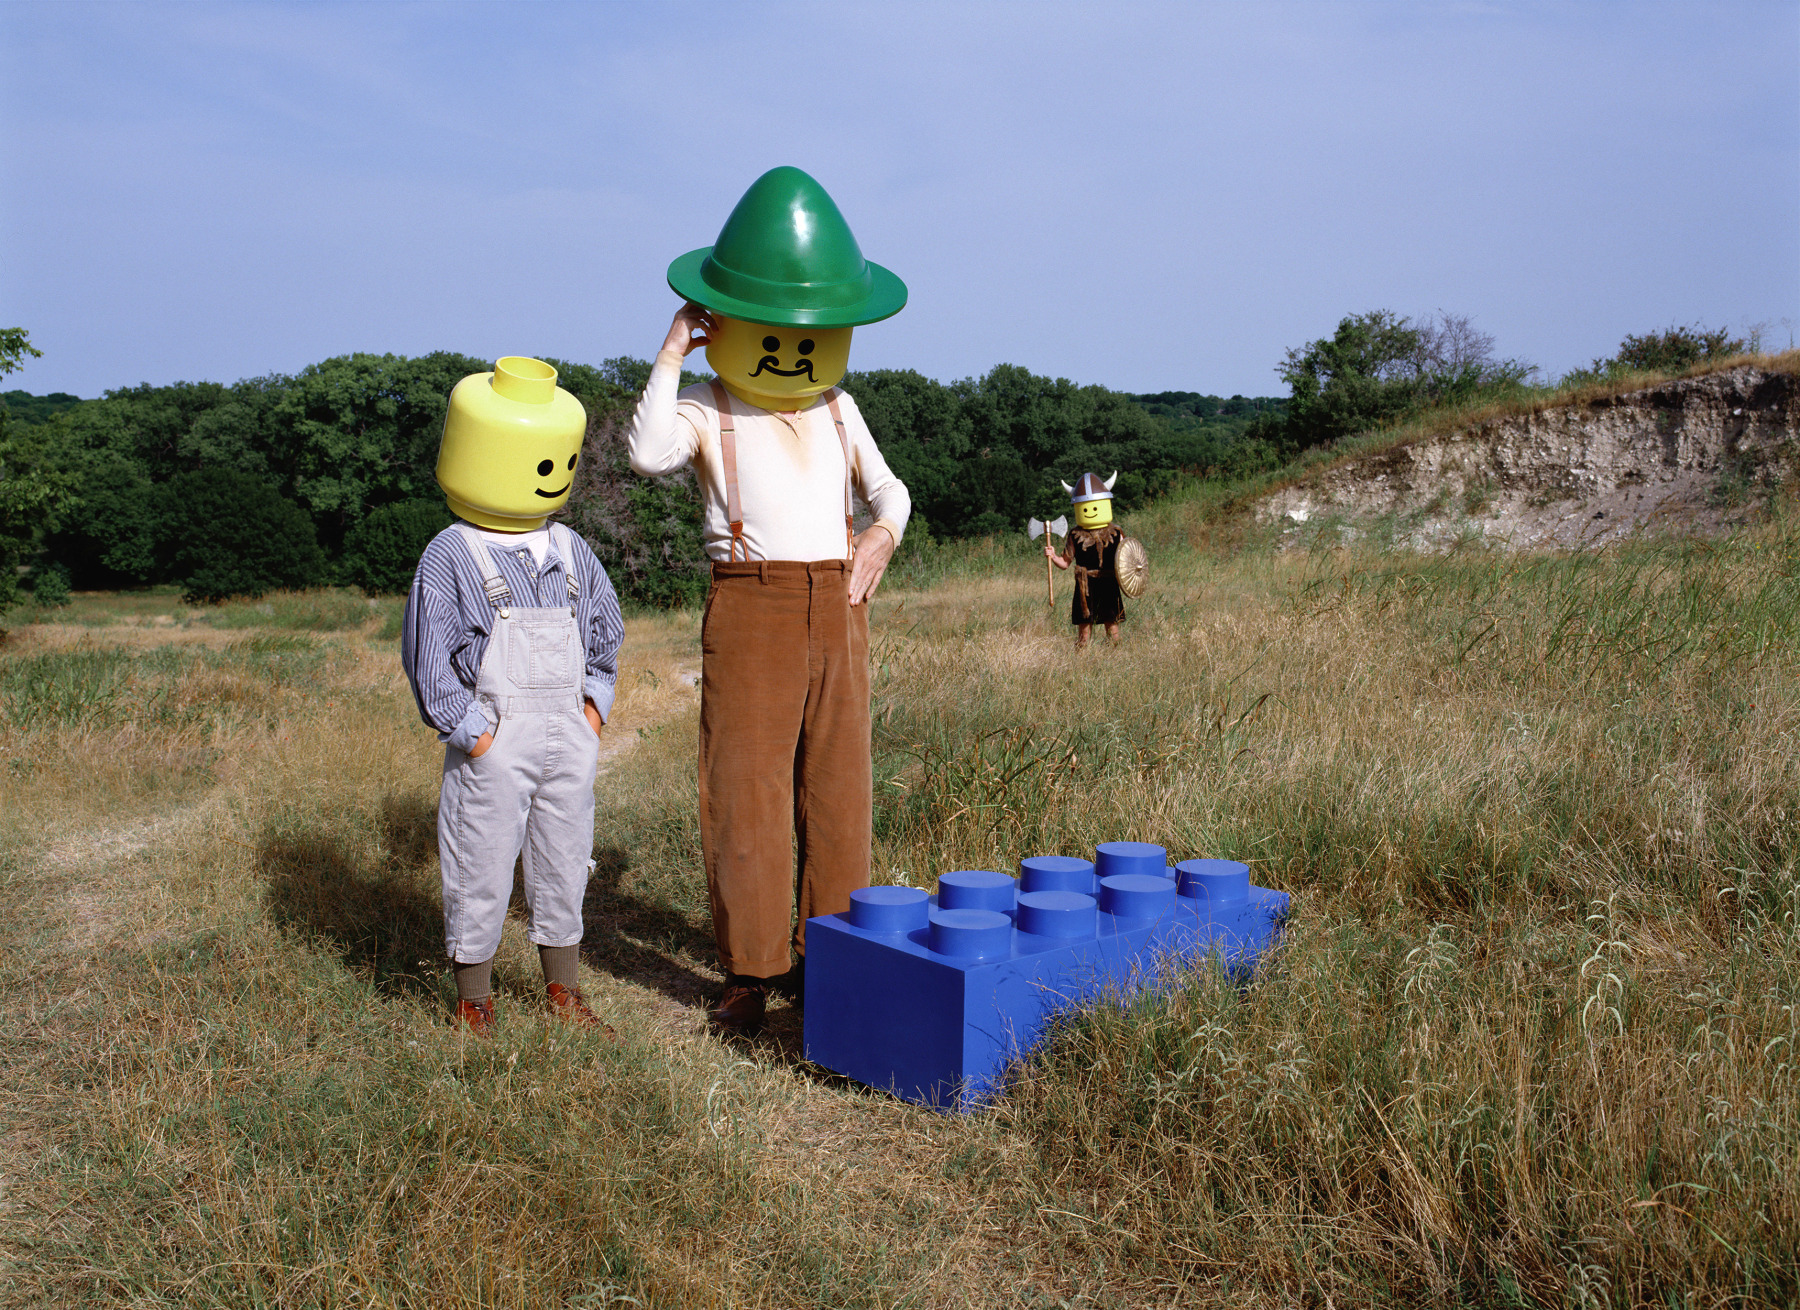 The Discovery of Legos, 2001, Archival Pigment Print